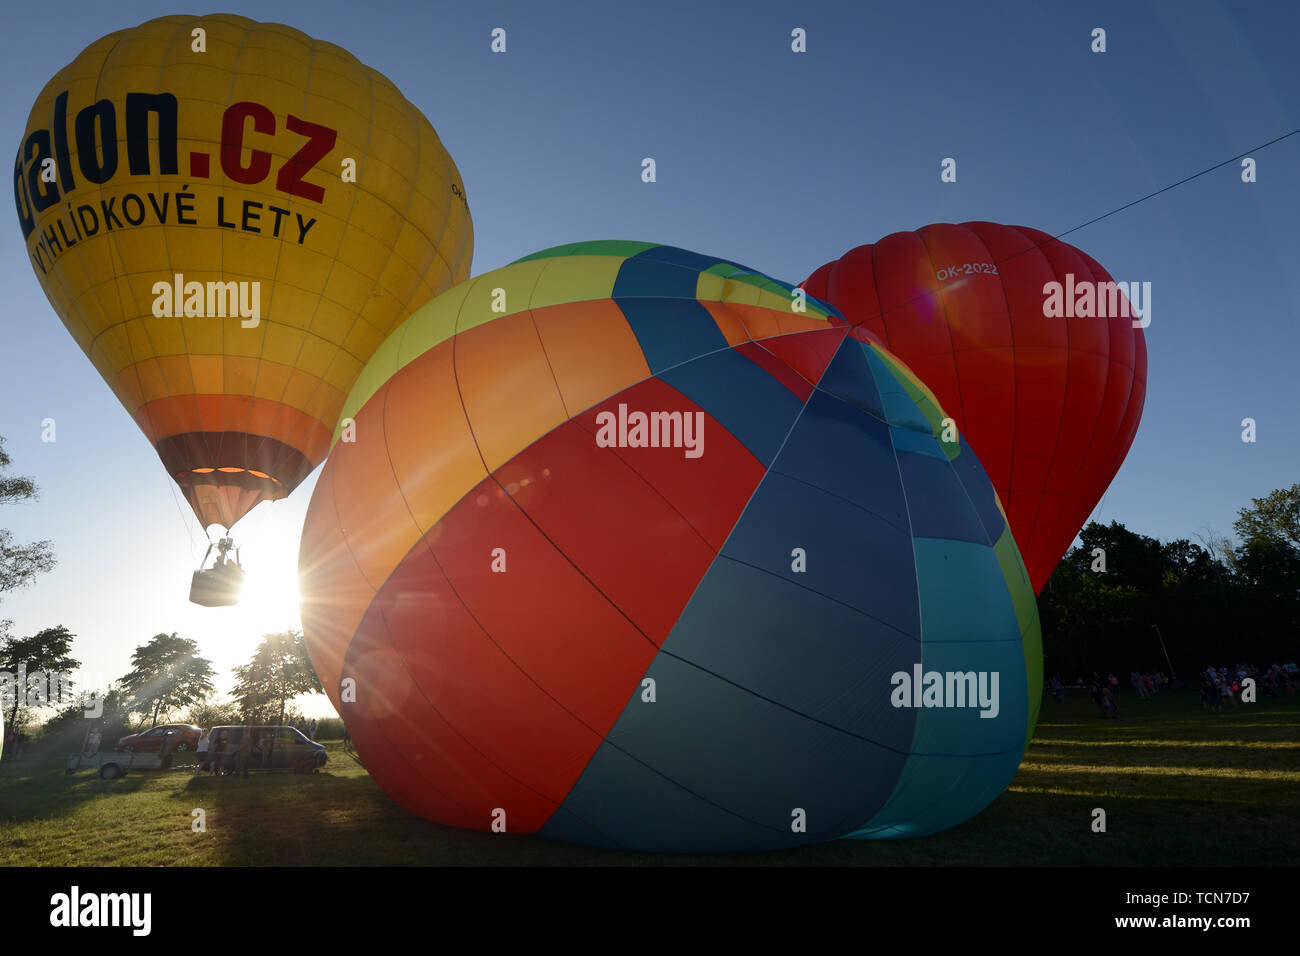 Bela Pod Bezdezem, Czech Republic. 9th June, 2019. The 17th Czech Hot-air Balloons Fiesta ''Belske hemzeni'' will take place in Bela pod Bezdezem (60 kilometers north of Prague) in the Czech Republic. The hot air balloon is the oldest successful human-carrying flight technology. On November 21, 1783, in Paris, France, the first manned flight was made by Jean-François Pilatre de Rozier and Francois Laurent d'Arlandes in a hot air balloon created by the Montgolfier brothers. Recently, balloon envelopes have been made in all kinds of shapes, such as hot dogs, rocket ships, and the shapes of c Stock Photo